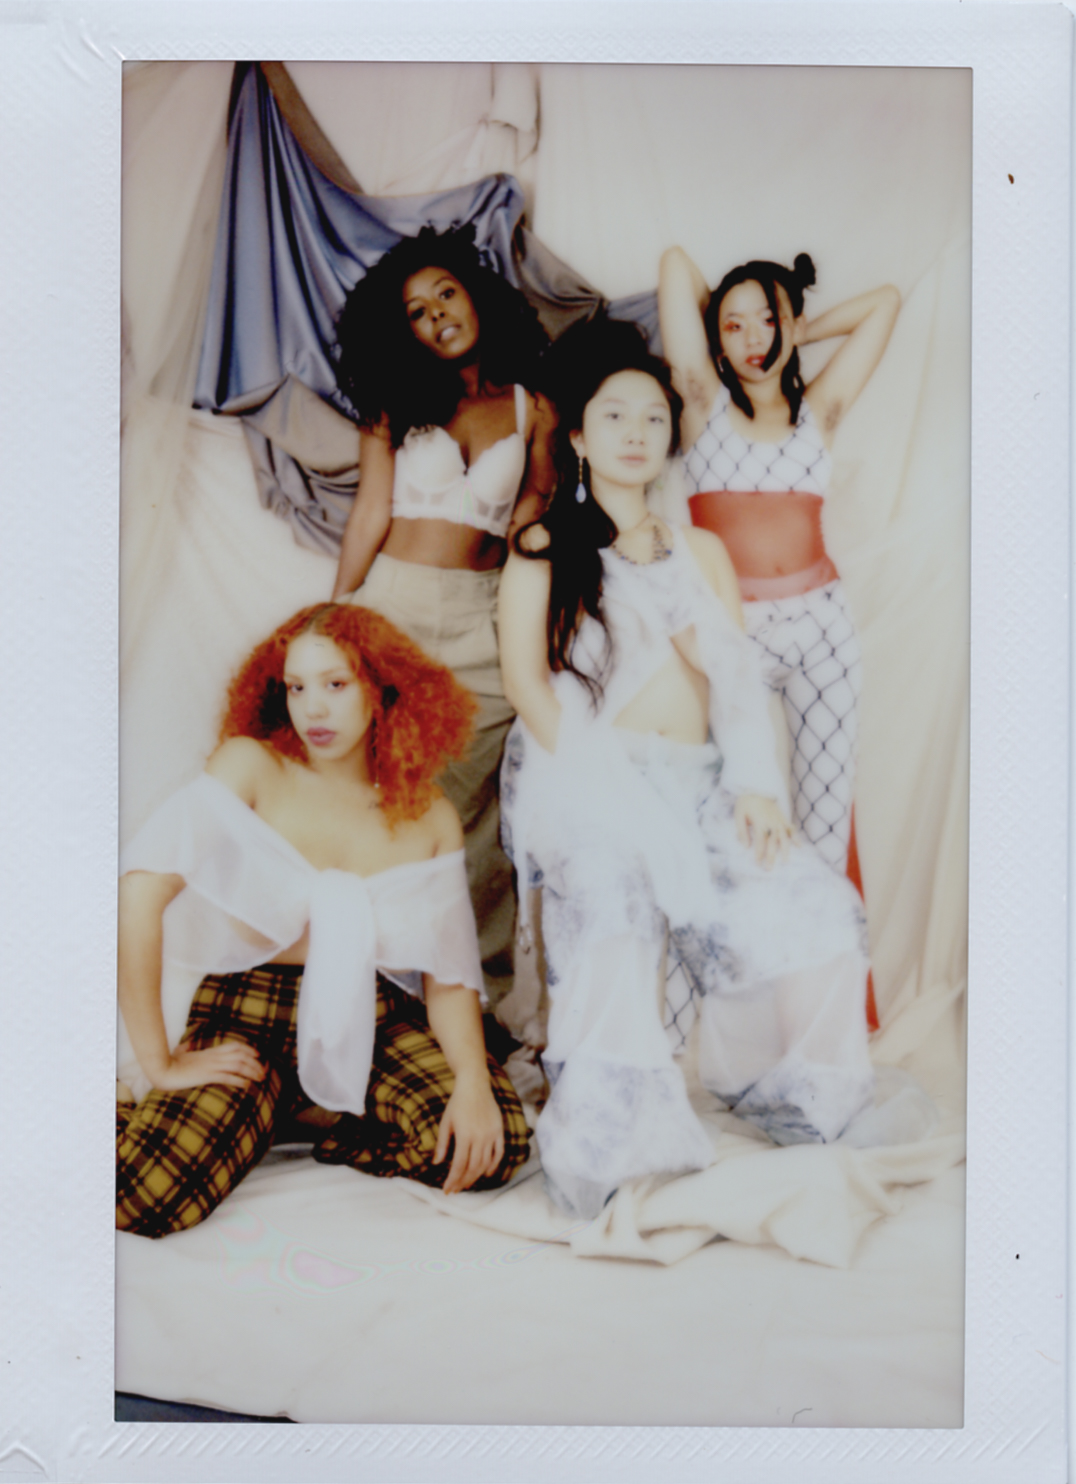 Polaroid outtakes from Green's Pur-suit shoots. Here, the women of The BUFU collective. 